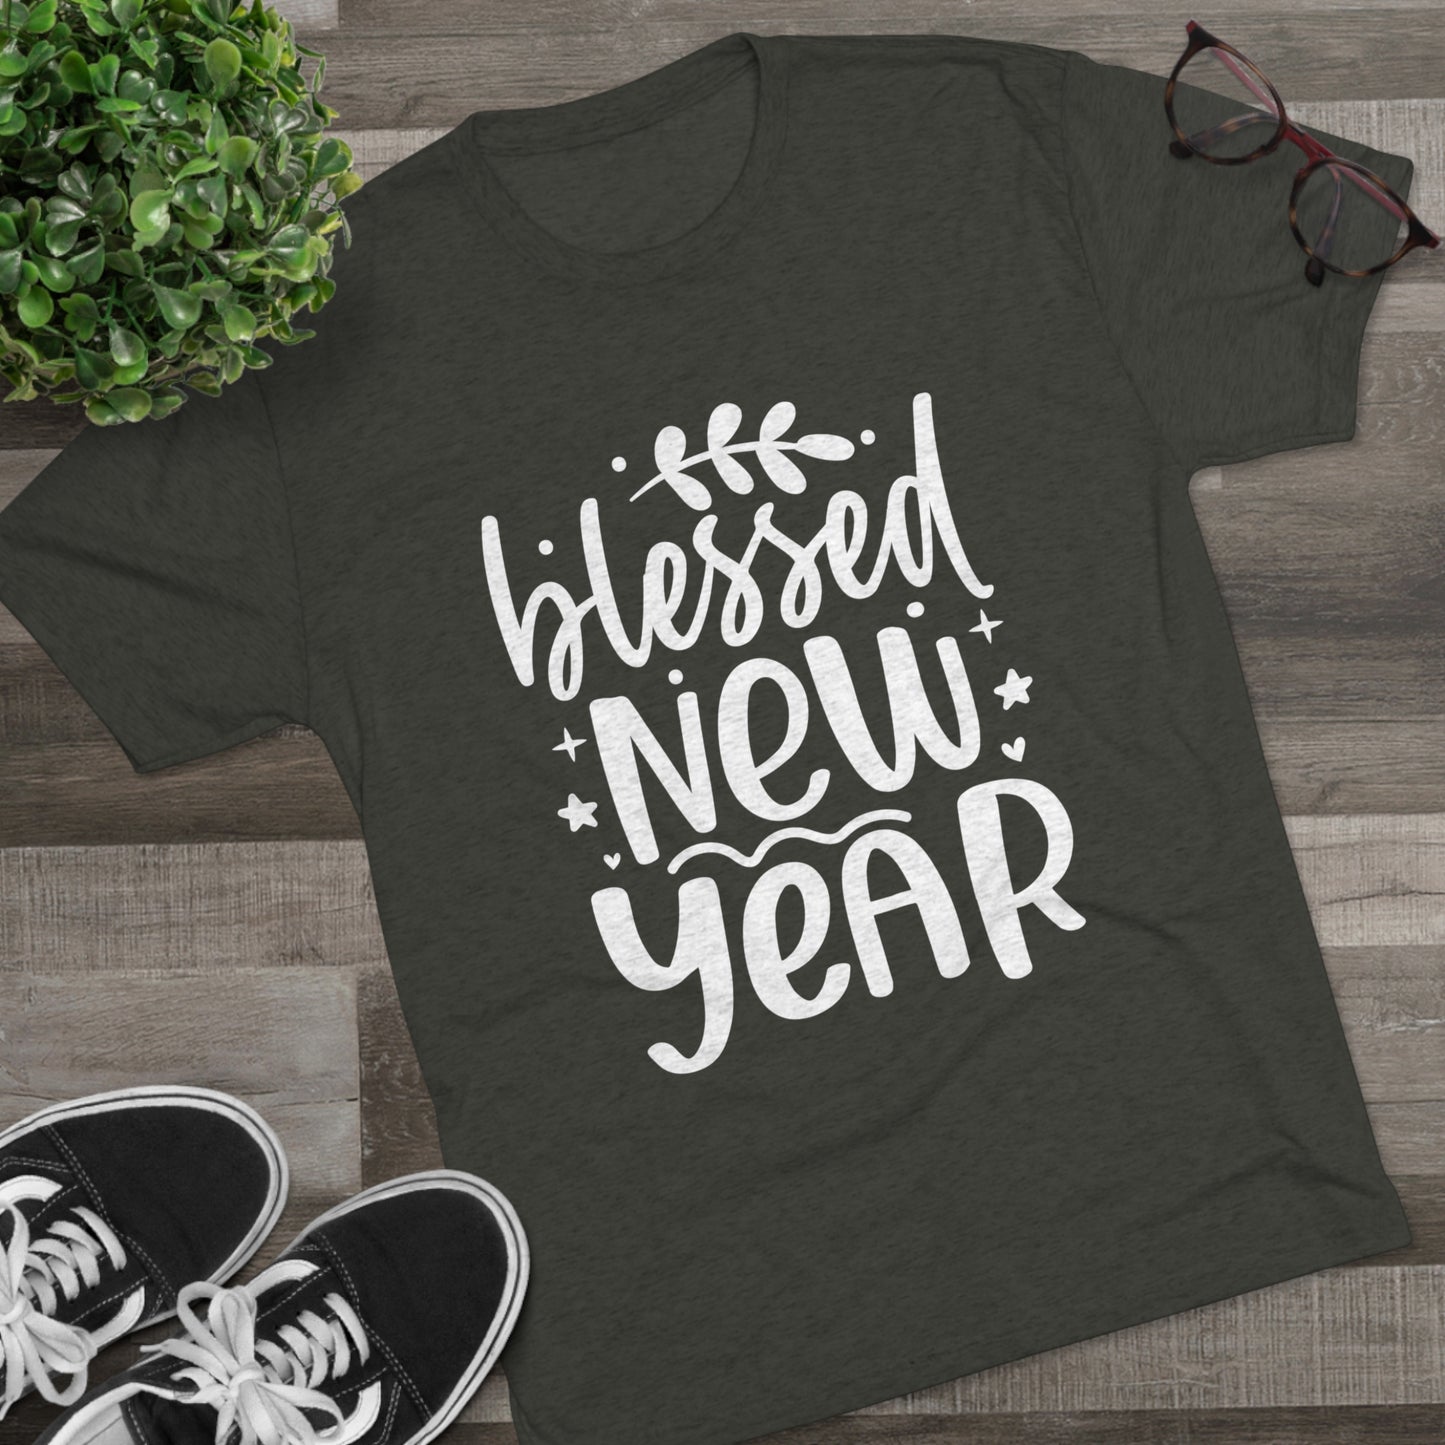 Blessed New Year Unisex Tri-Blend Crew Tee